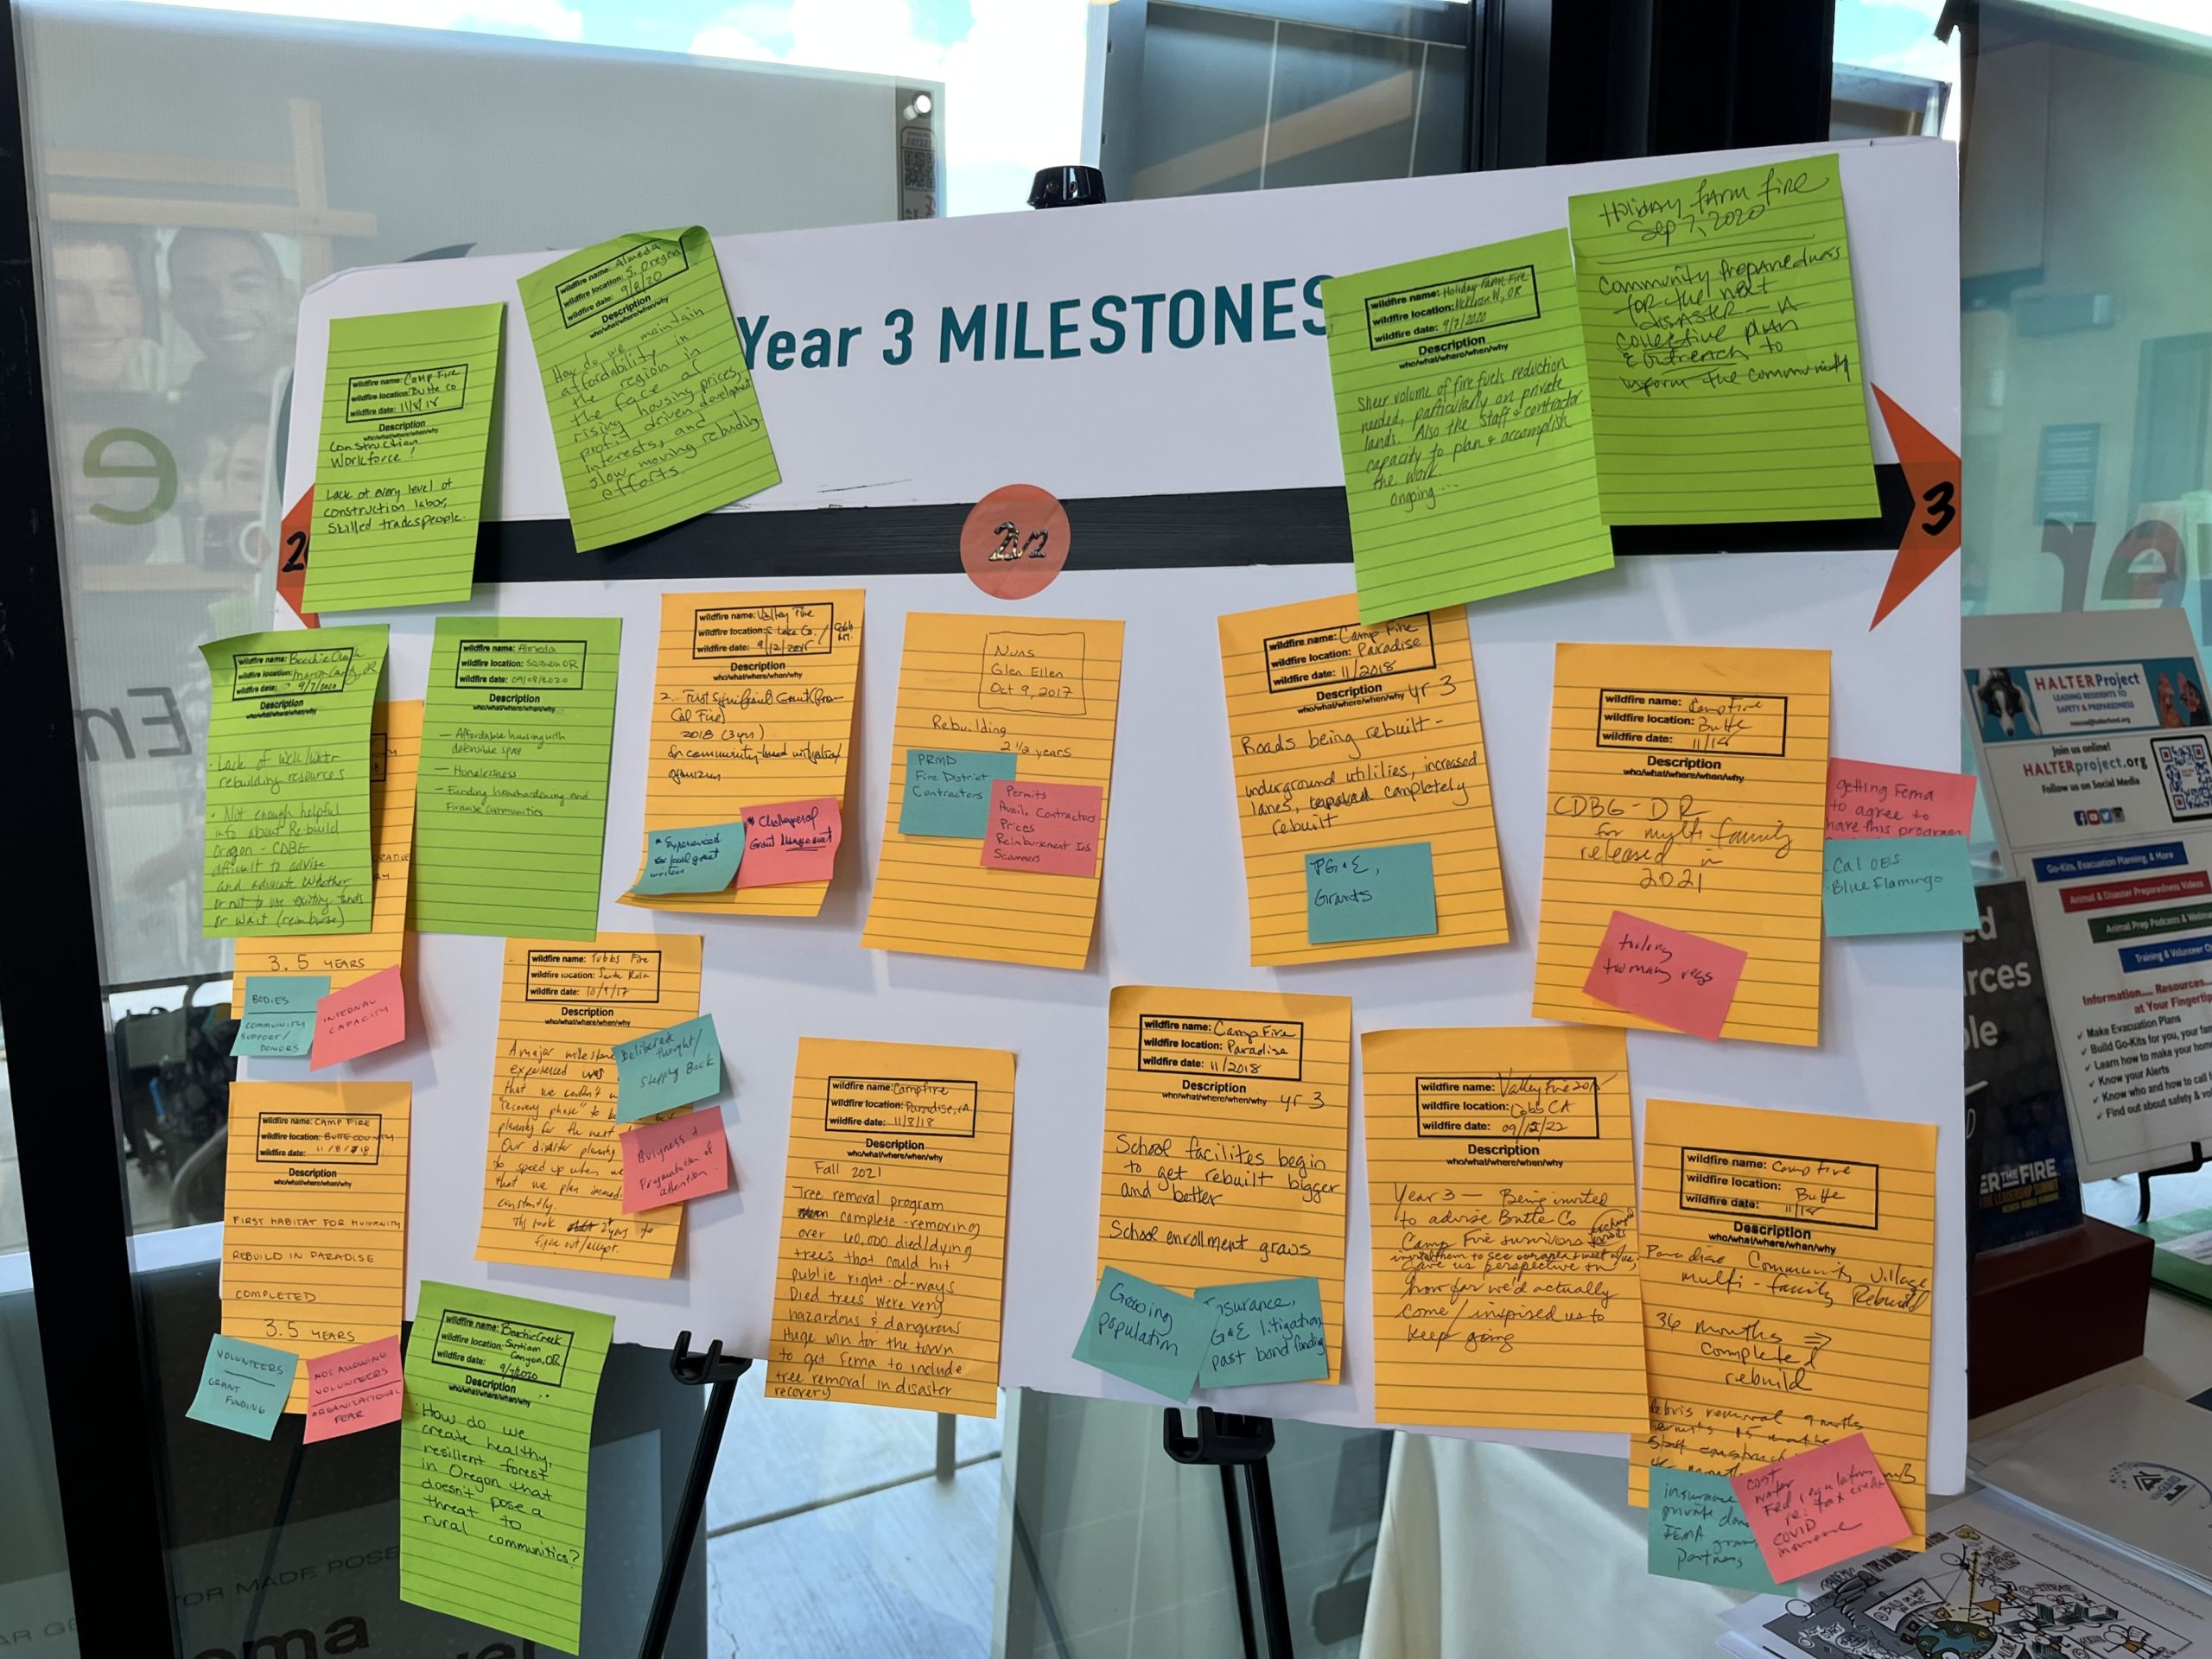 The Workshop on Day 1 examined milestones and challenges along five years of wildfire recovery